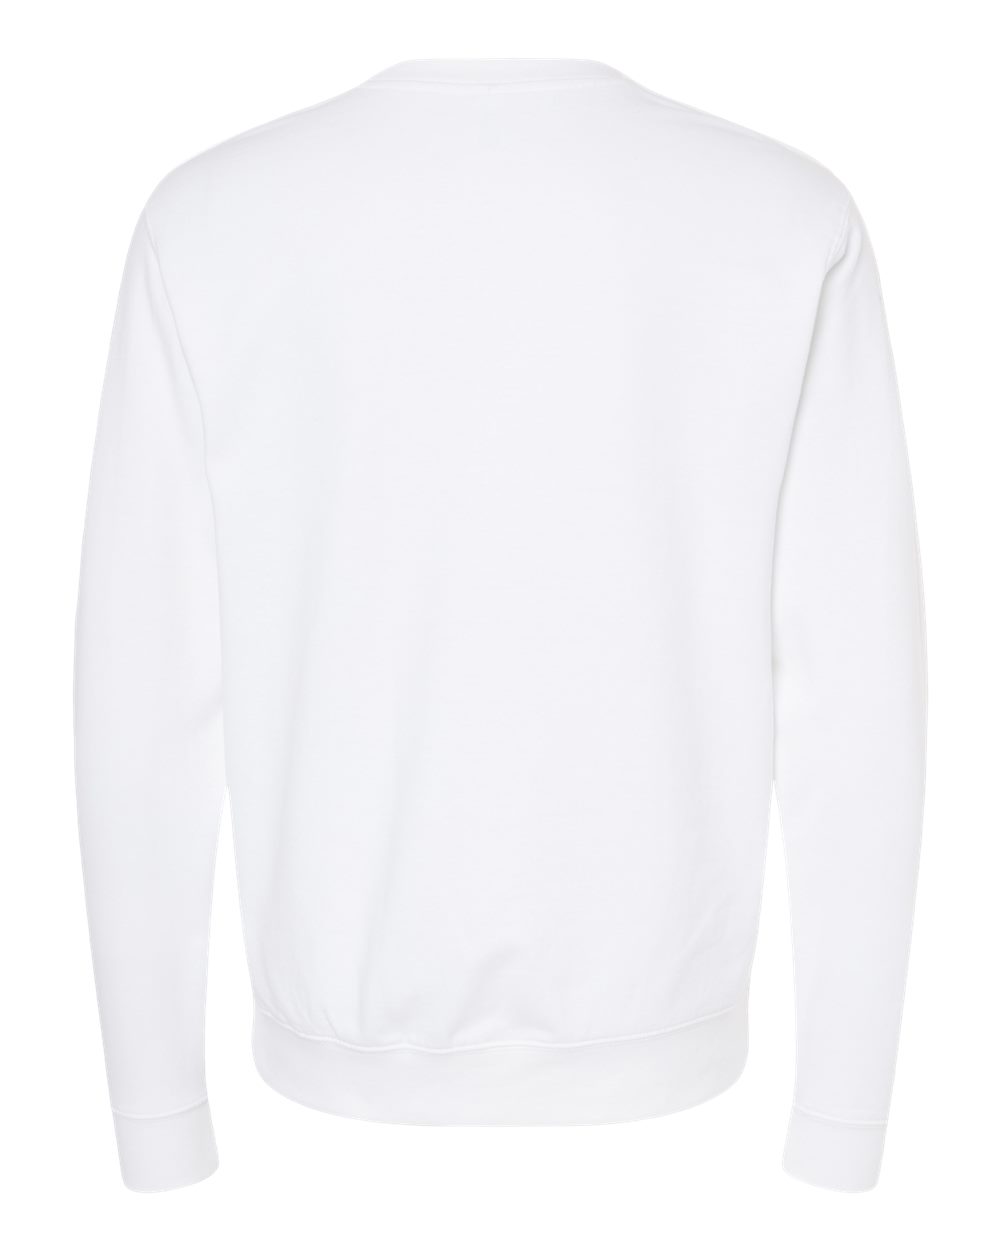 Independent Trading Co. SS3000 Midweight Crewneck Sweatshirt 